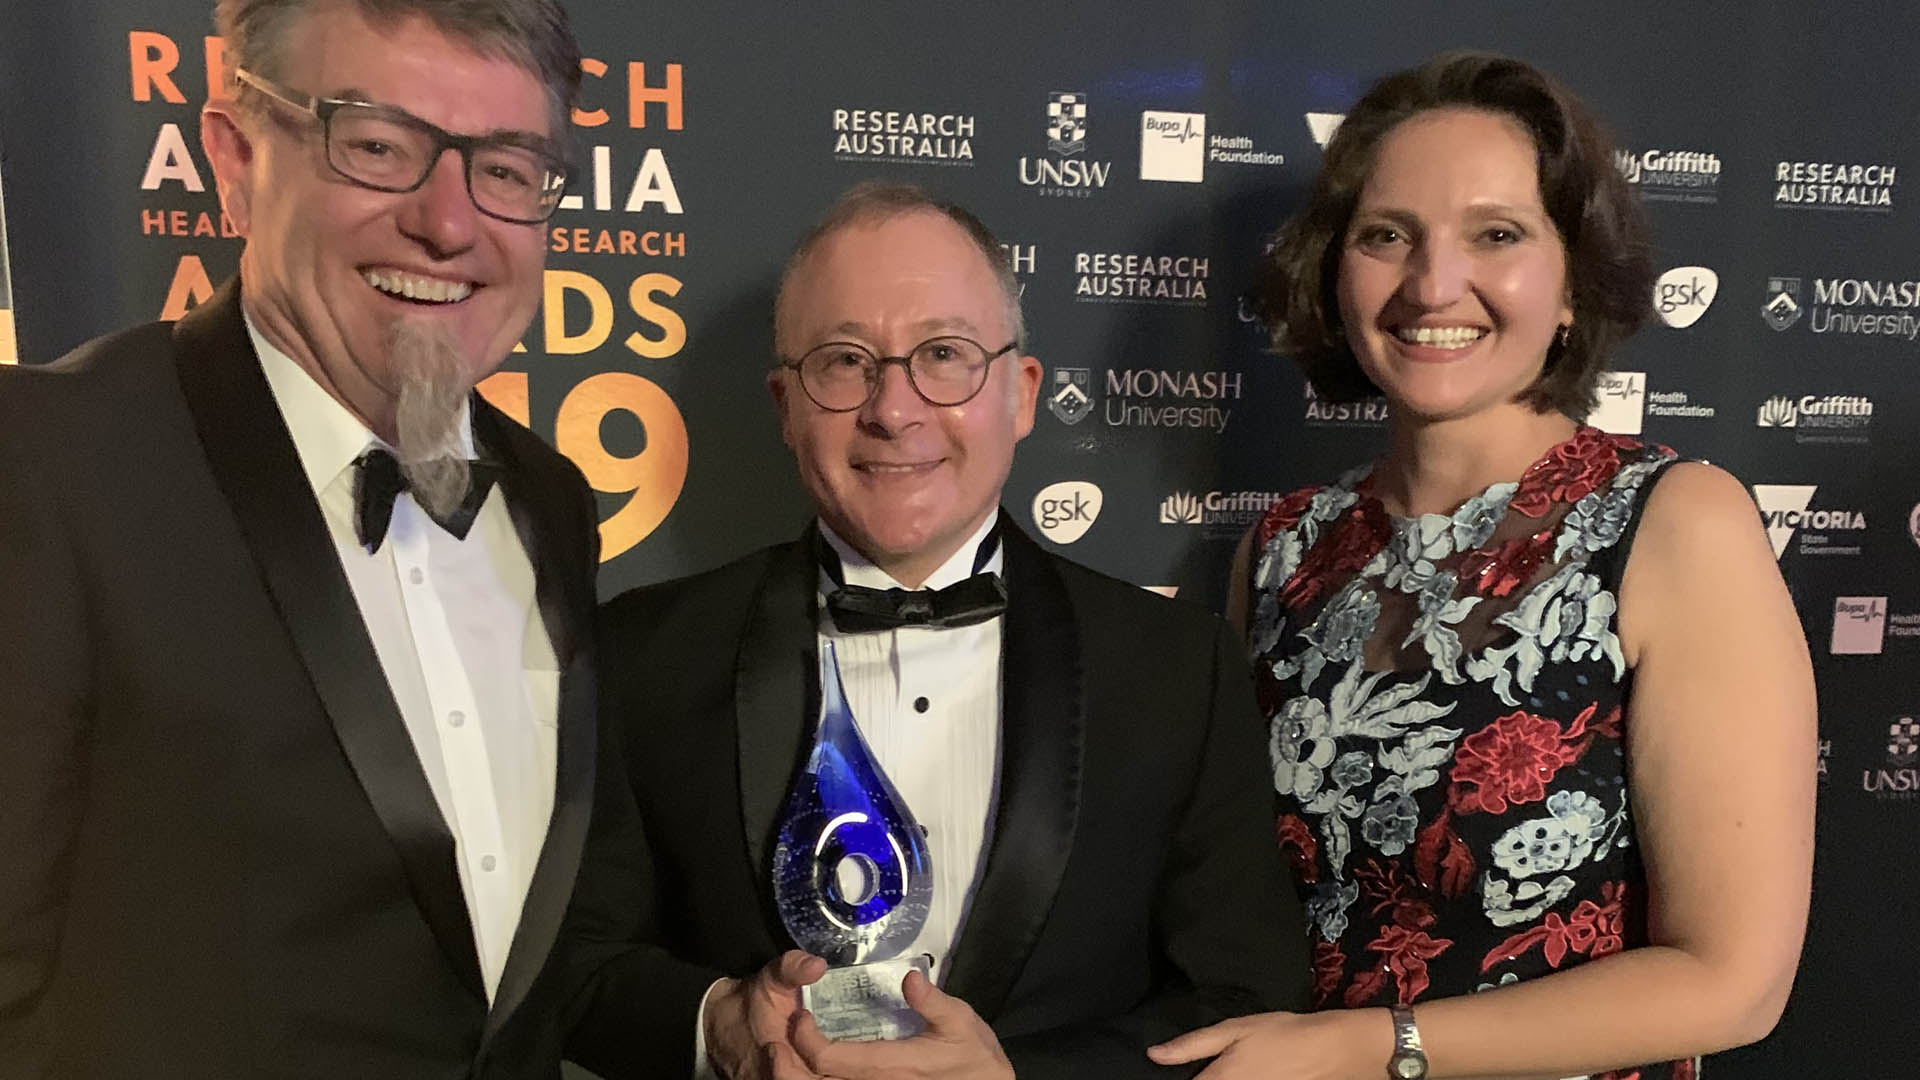 Gordon Wallace, Jeremy Crook and Eva Tomaskovic-Crook at the 2019 Research Australia Health and Medical Research Awards.